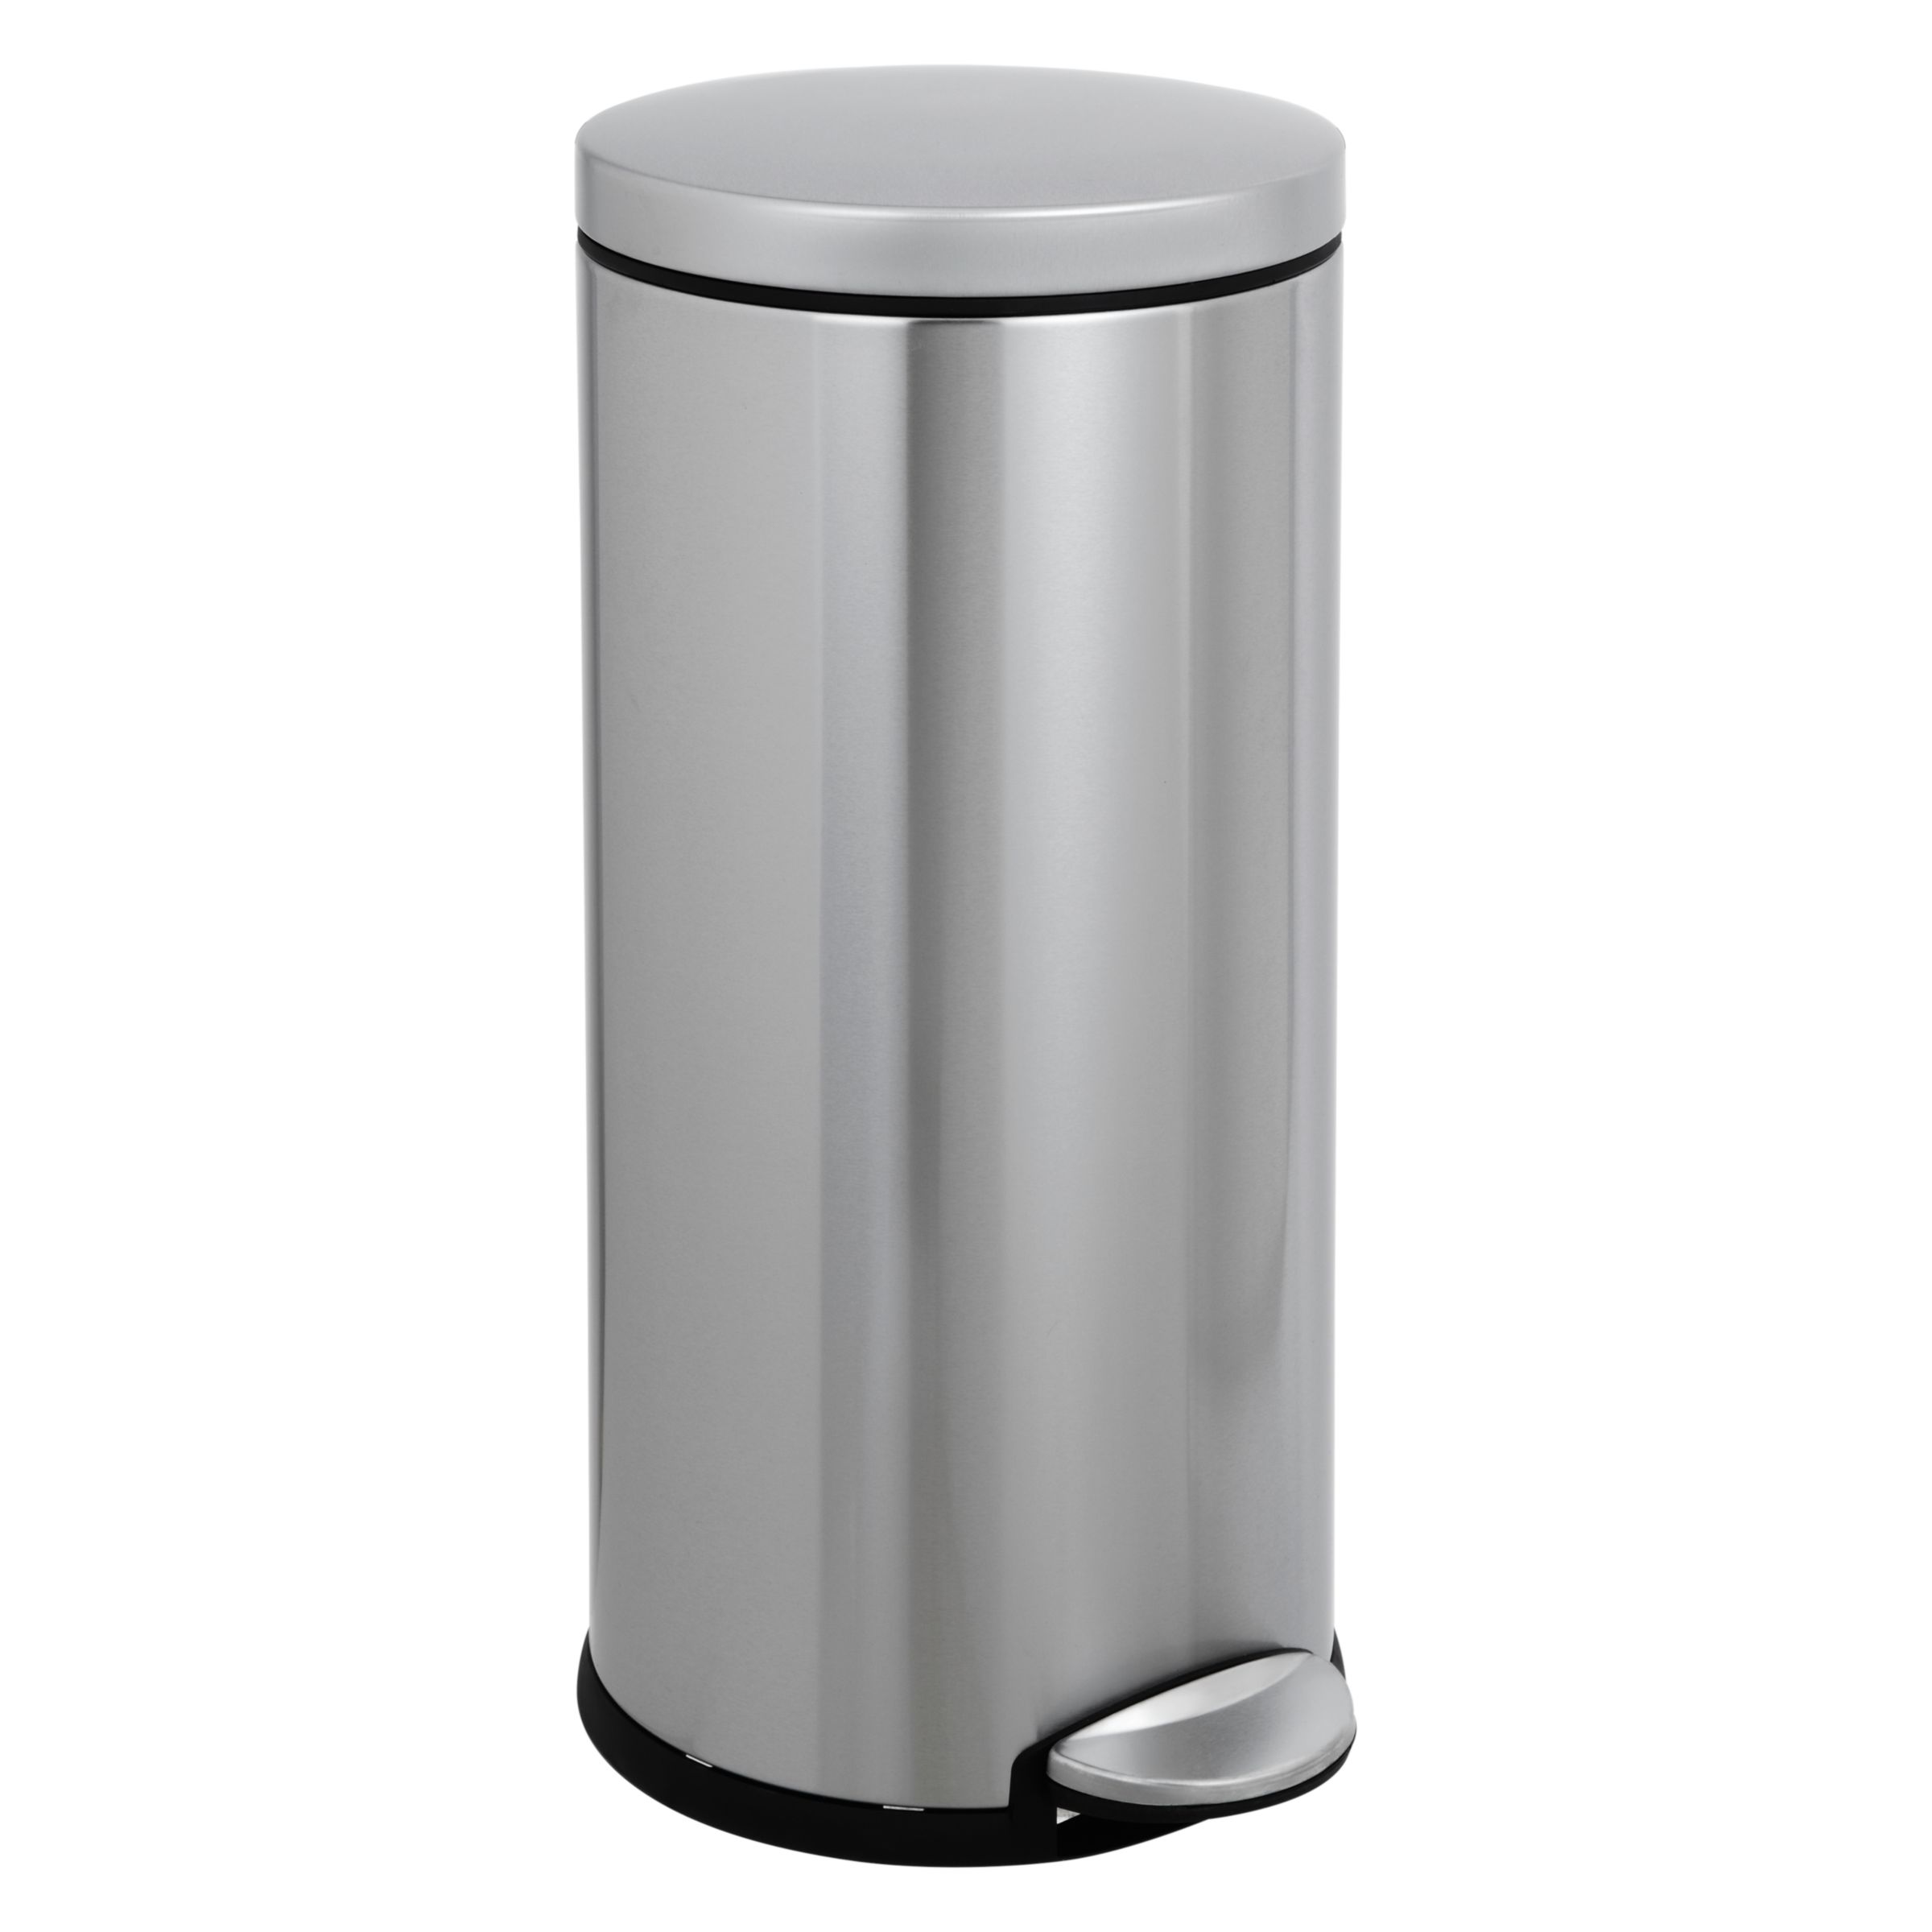 Syfinee Kitchen Pedal Bin with Stand Stainless Steel silver